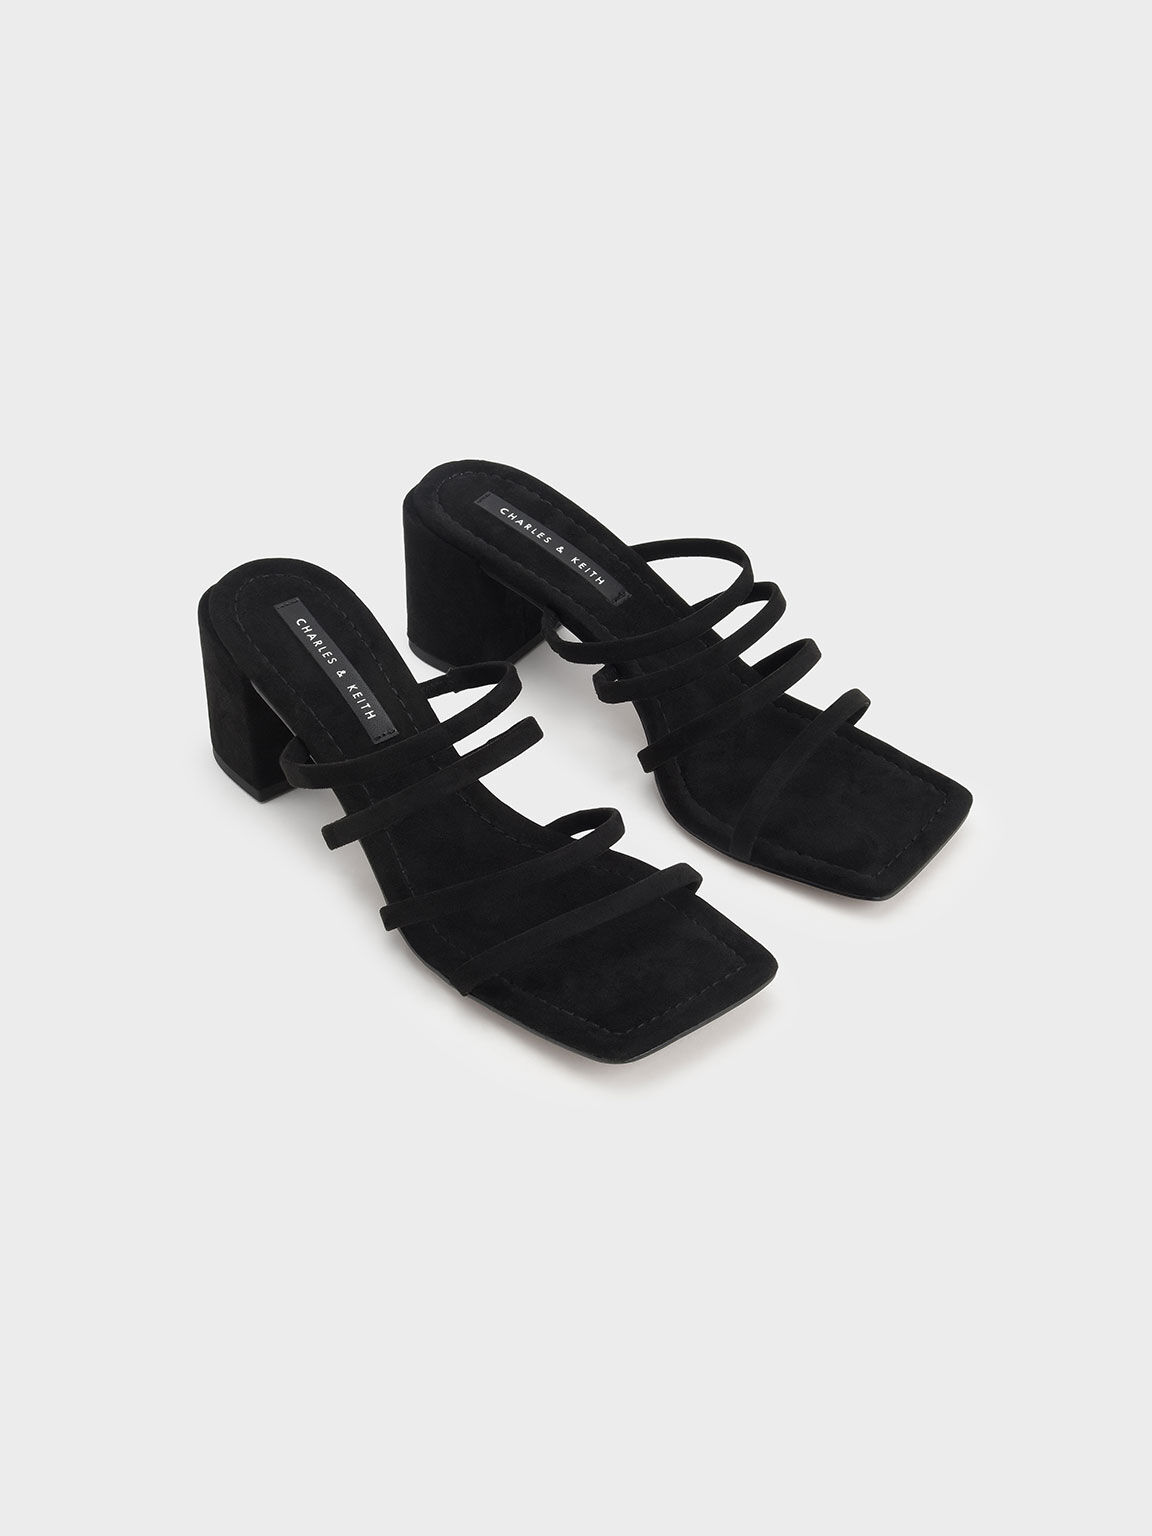 Strappy Square-Toe Heeled Mules, Black, hi-res